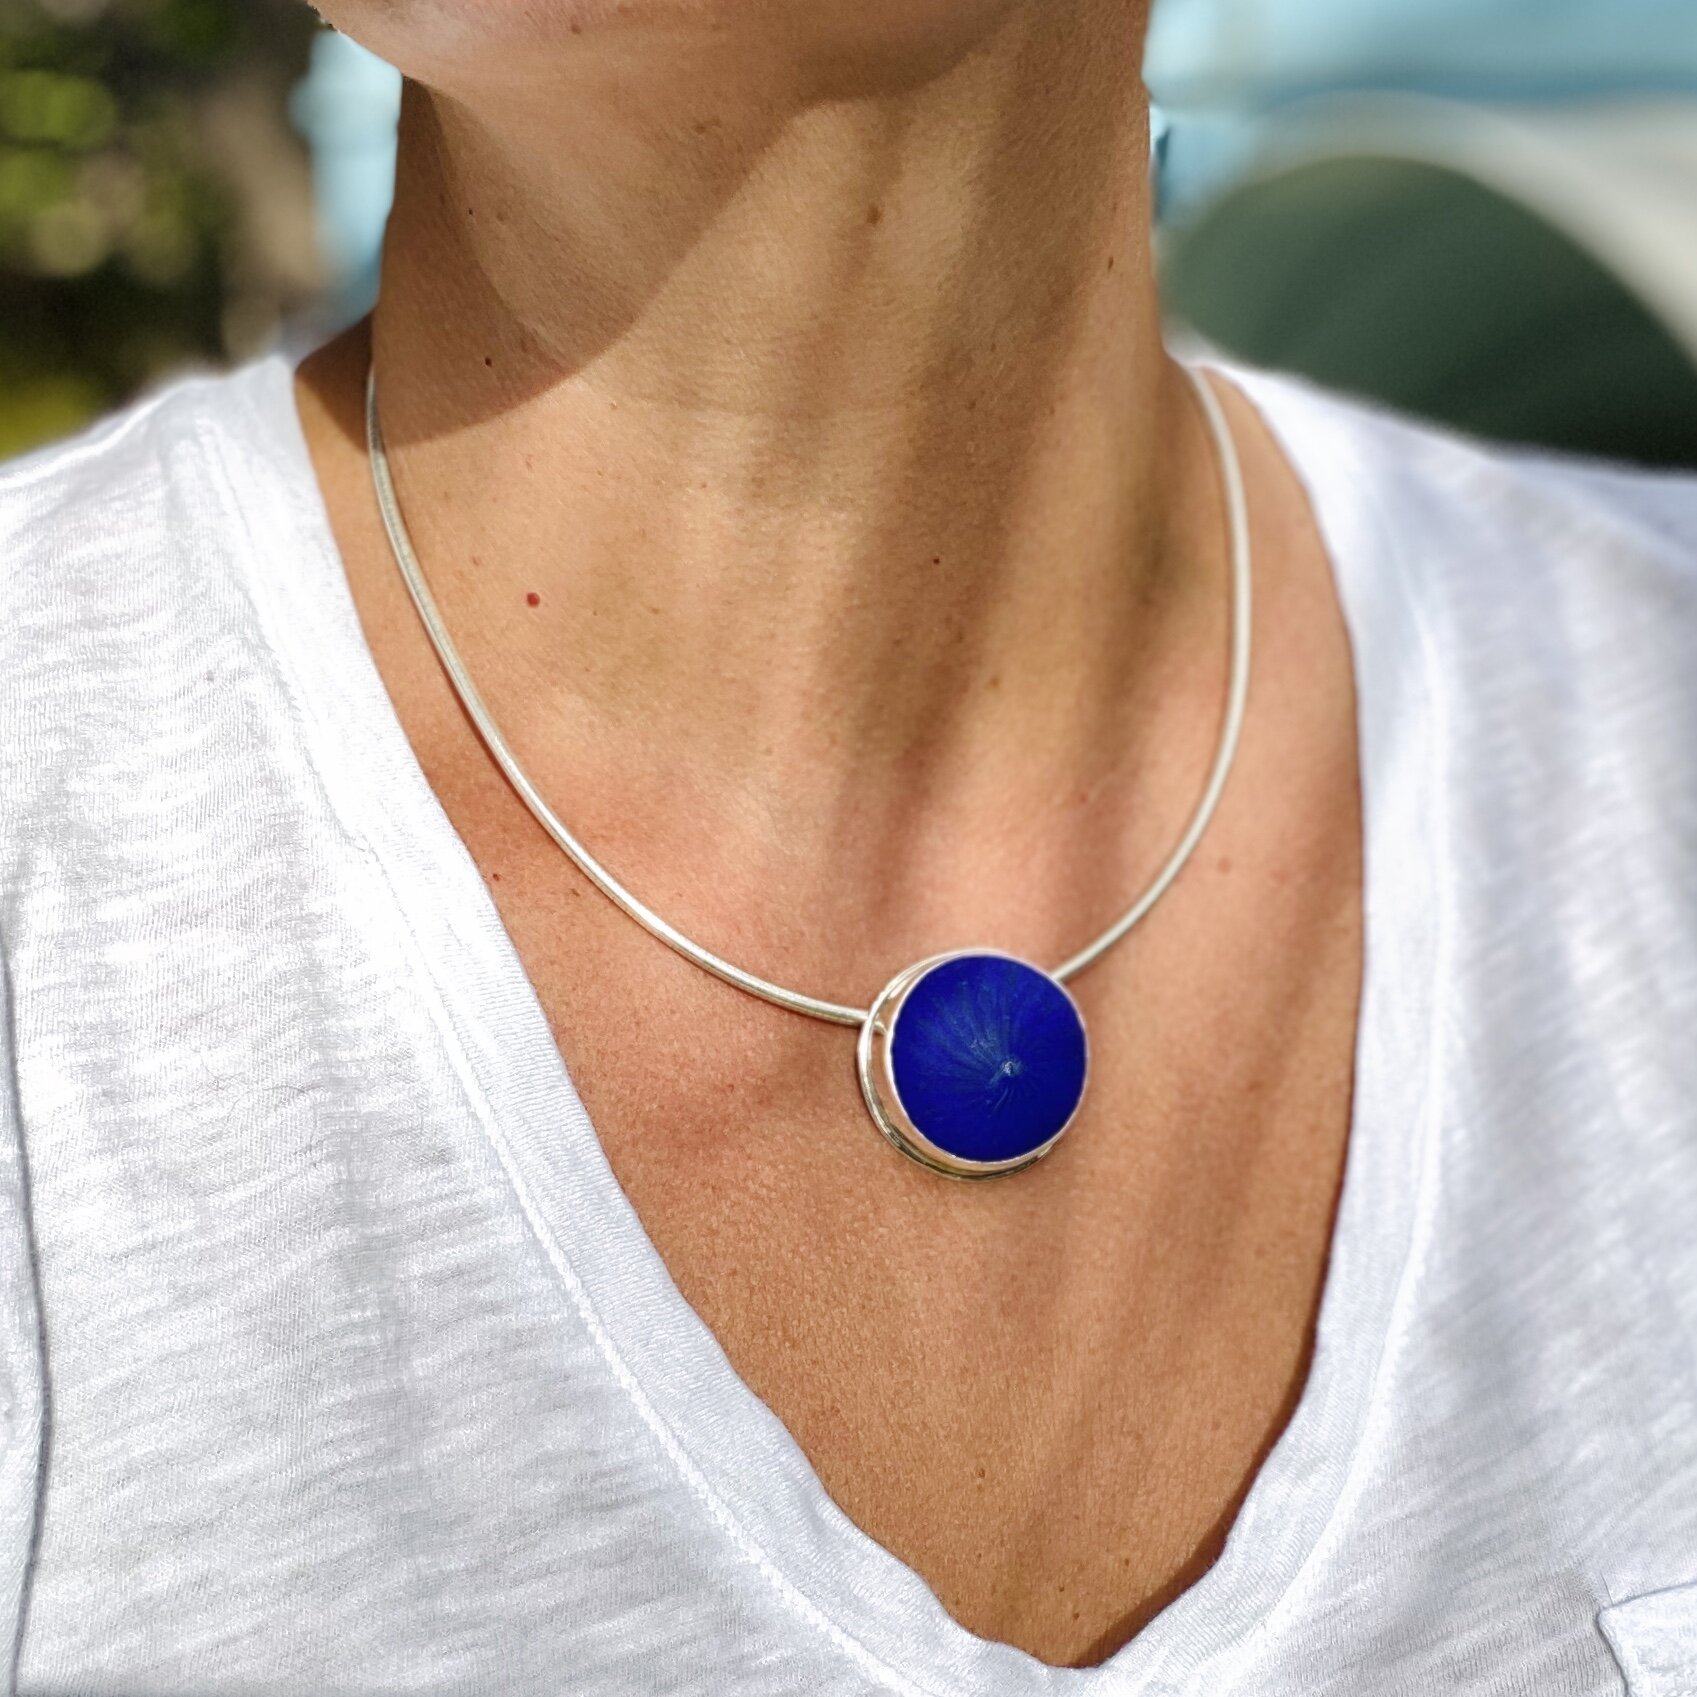 BIG Bold BLUE and BEAUTIFUL Glass in Sterling Silver Pendant ~ Bright and brilliant blue glass set in simple silver pendant